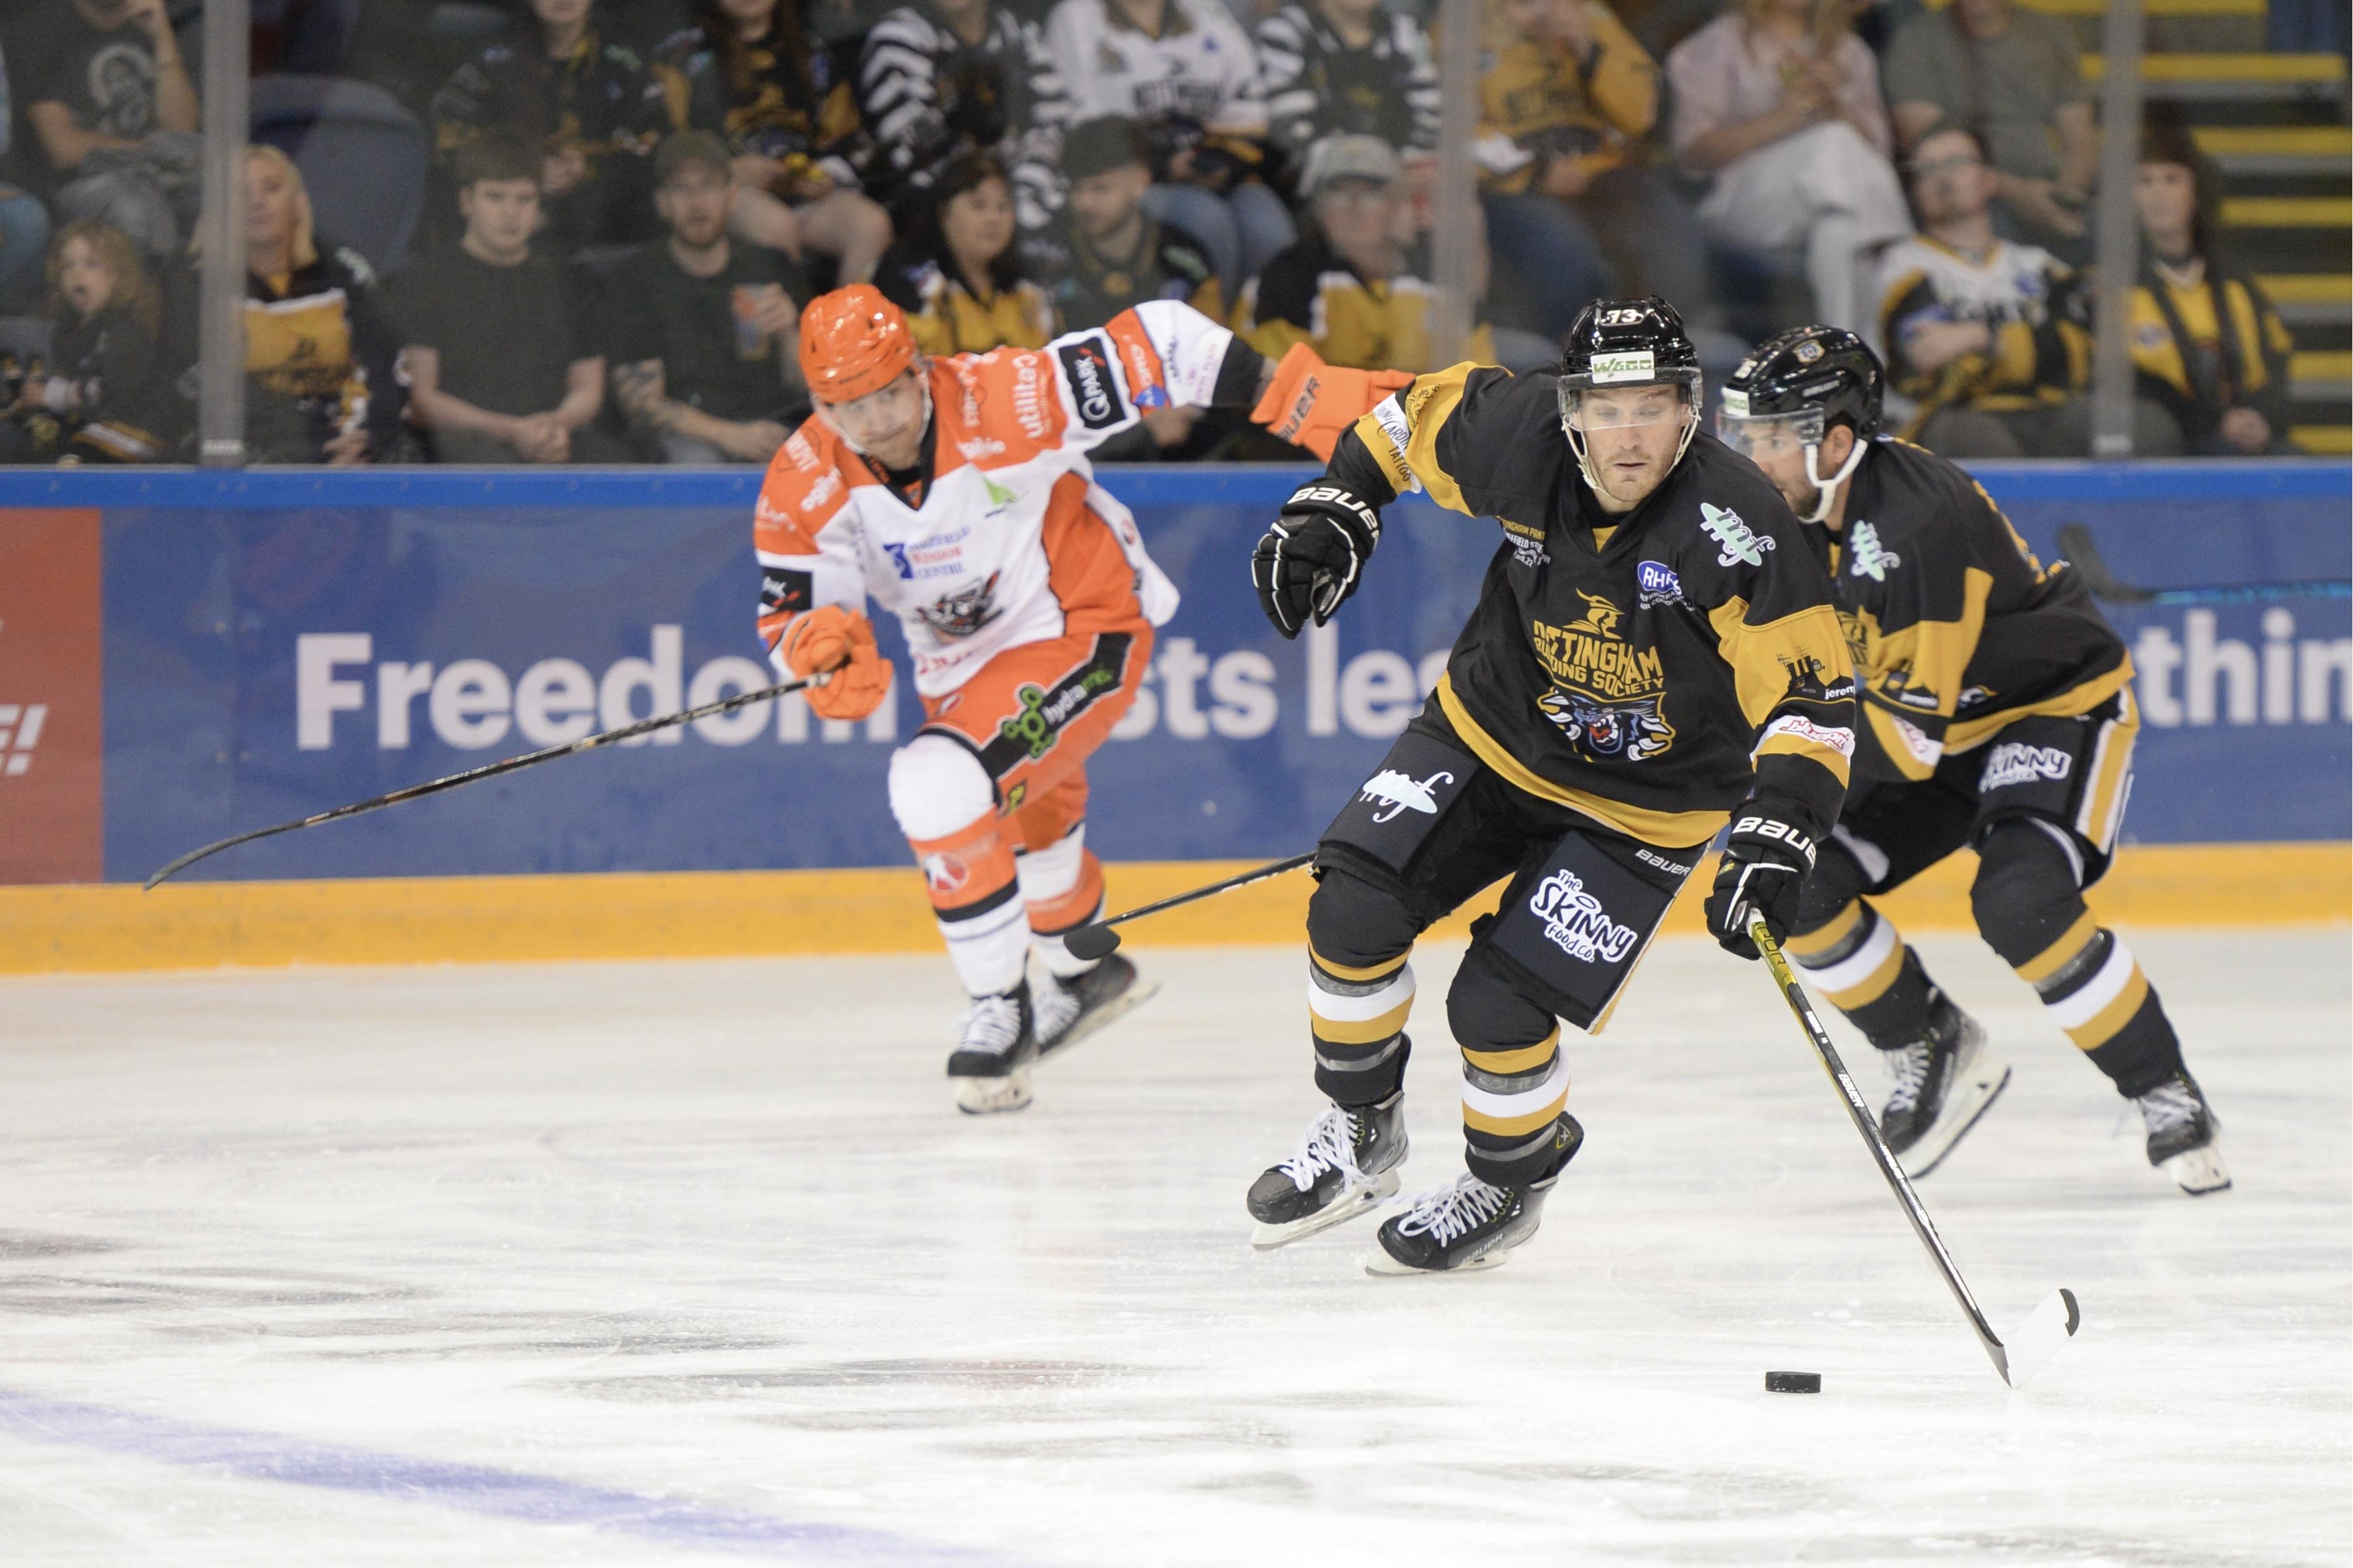 FEWER THAN 50 TICKETS REMAIN FOR STEELERS ON SATURDAY Top Image